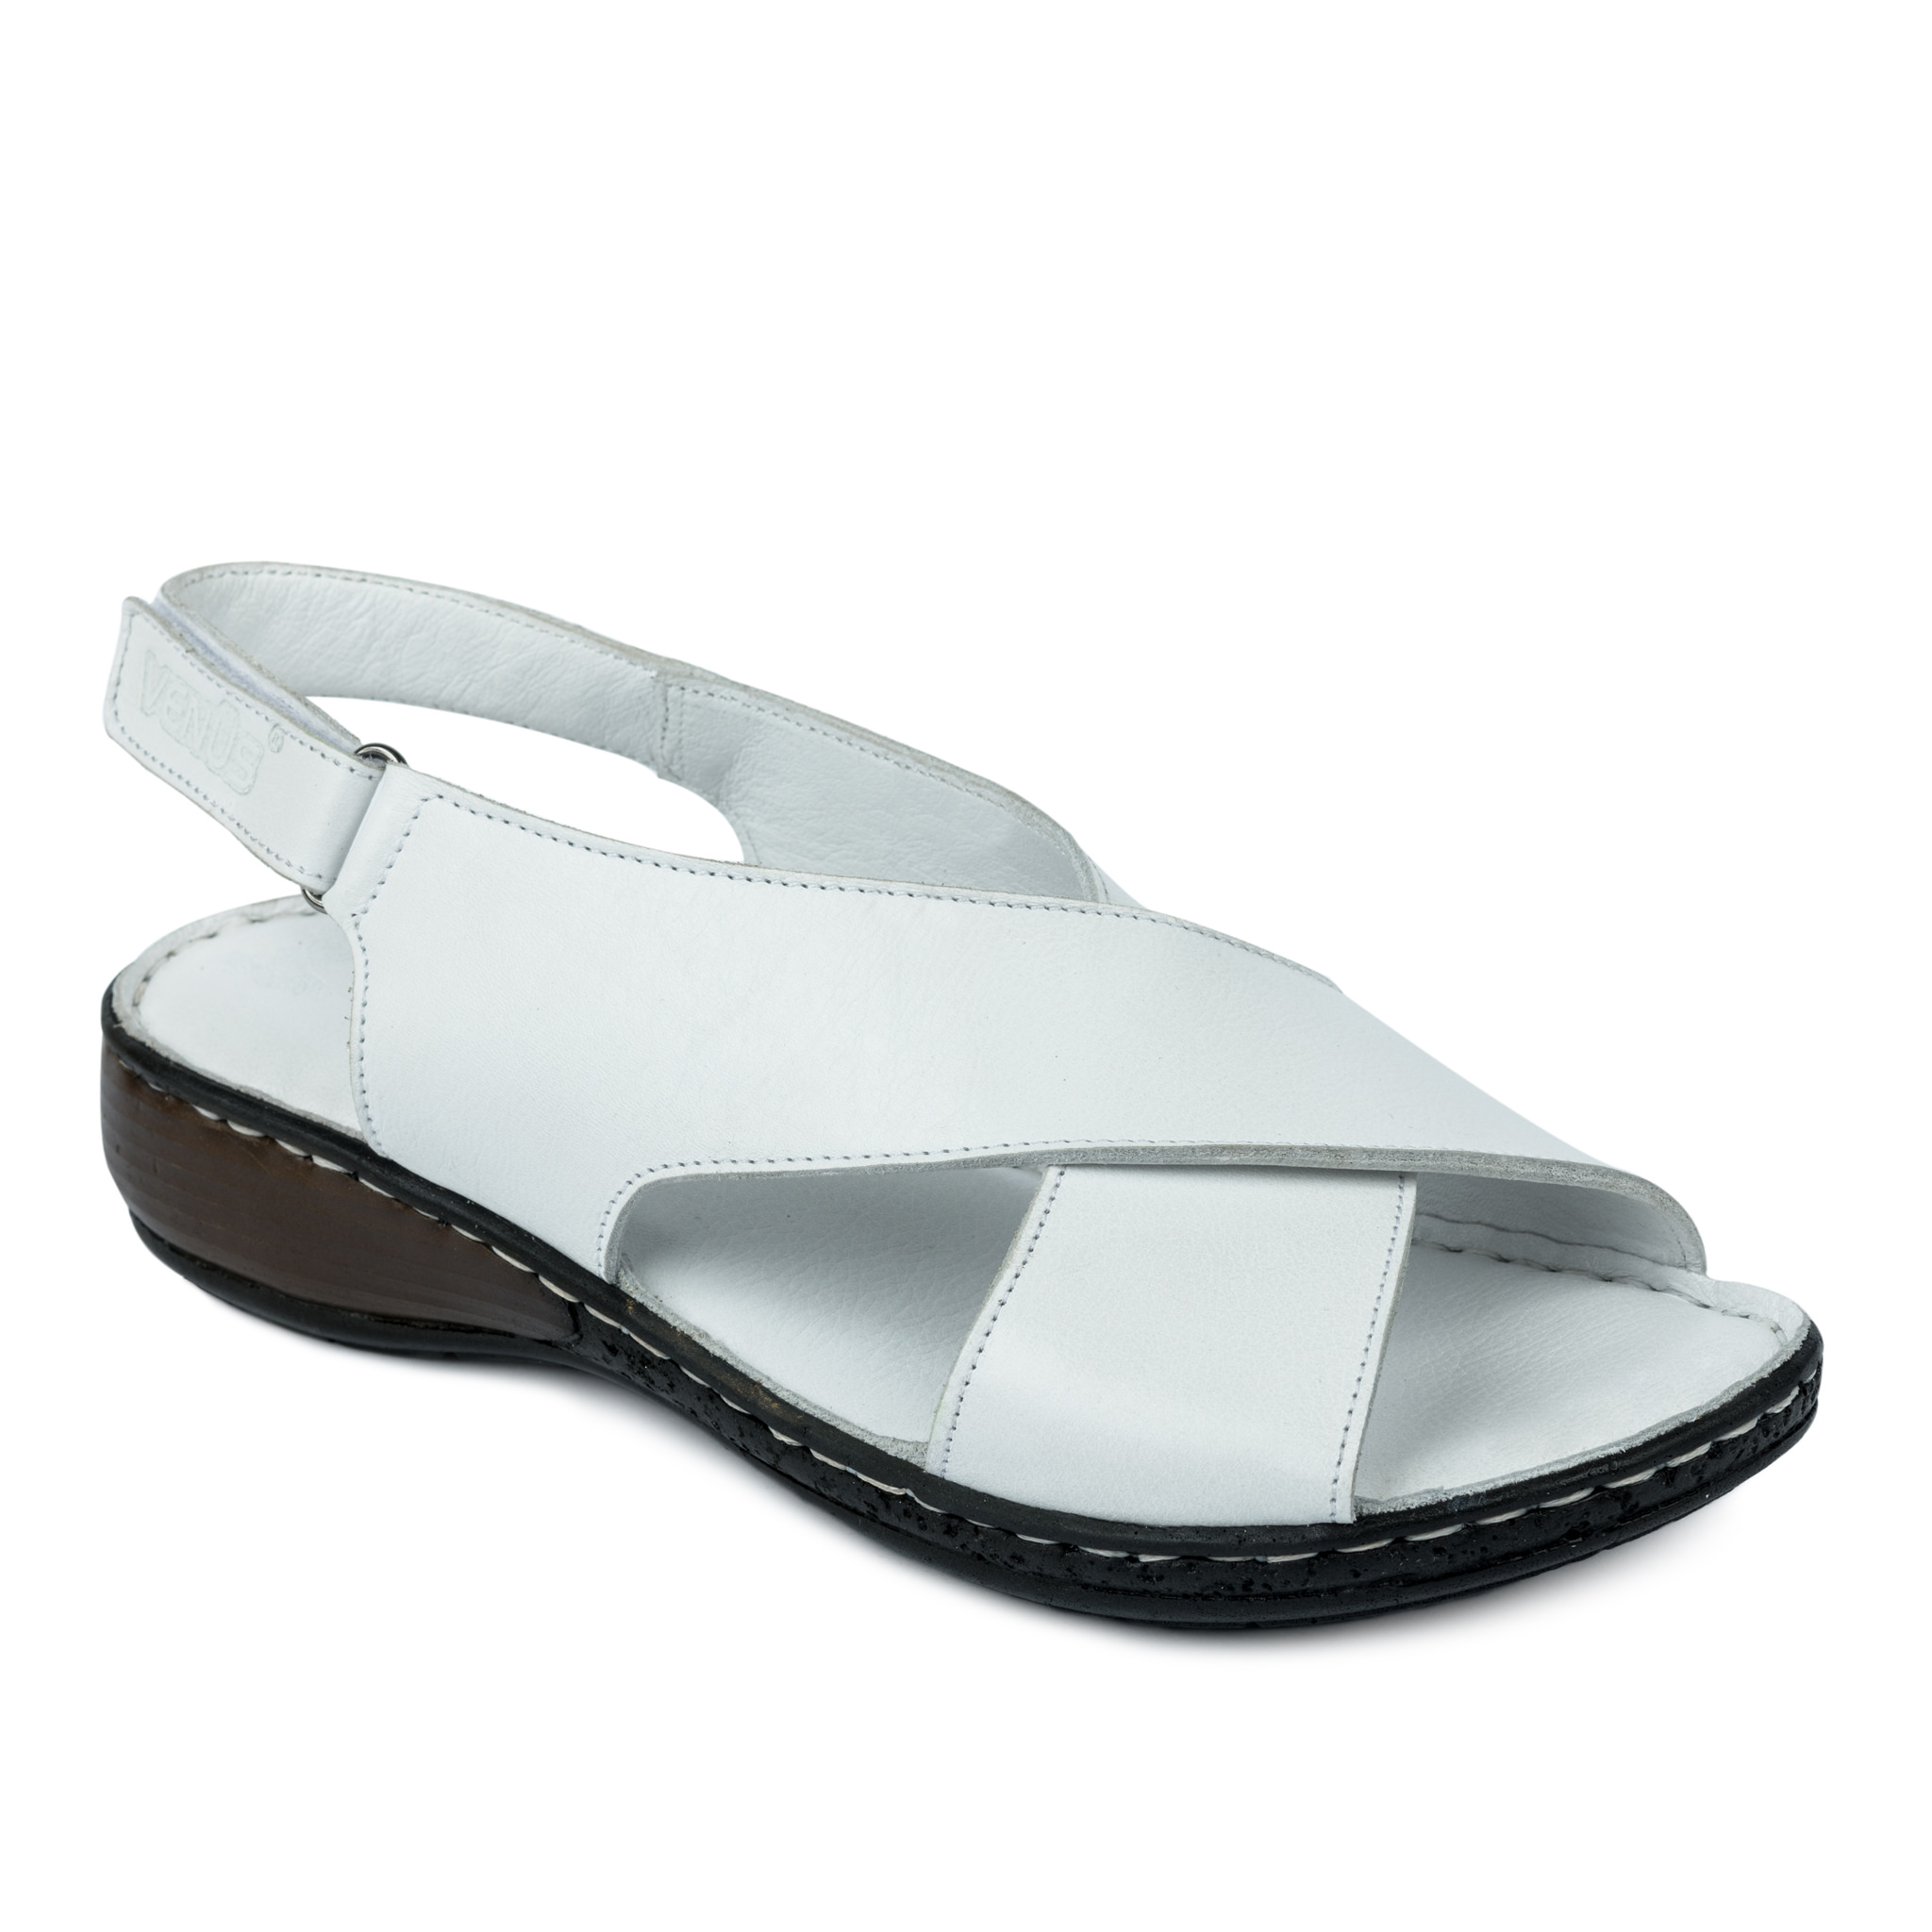 Leather sandals A229 - WHITE